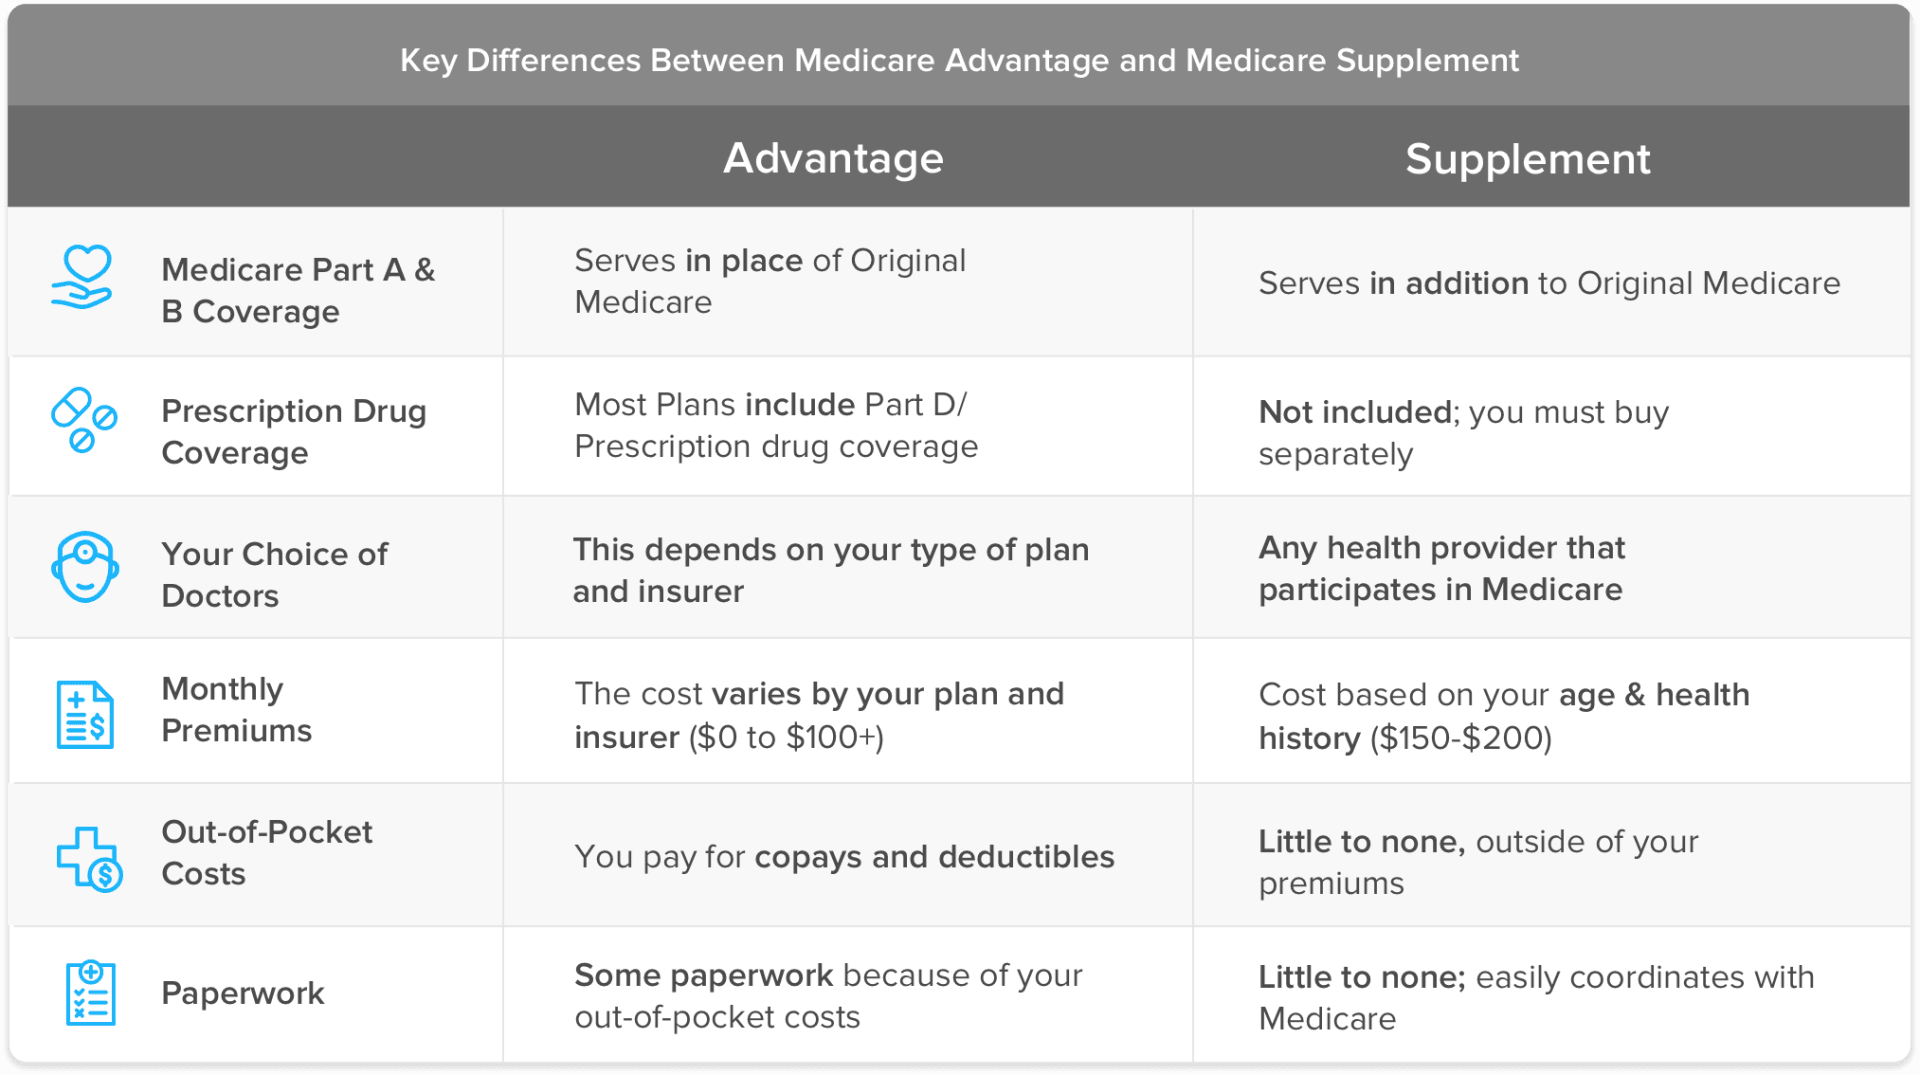 Medigap or Medicare Advantage: Which Is Better for Me?